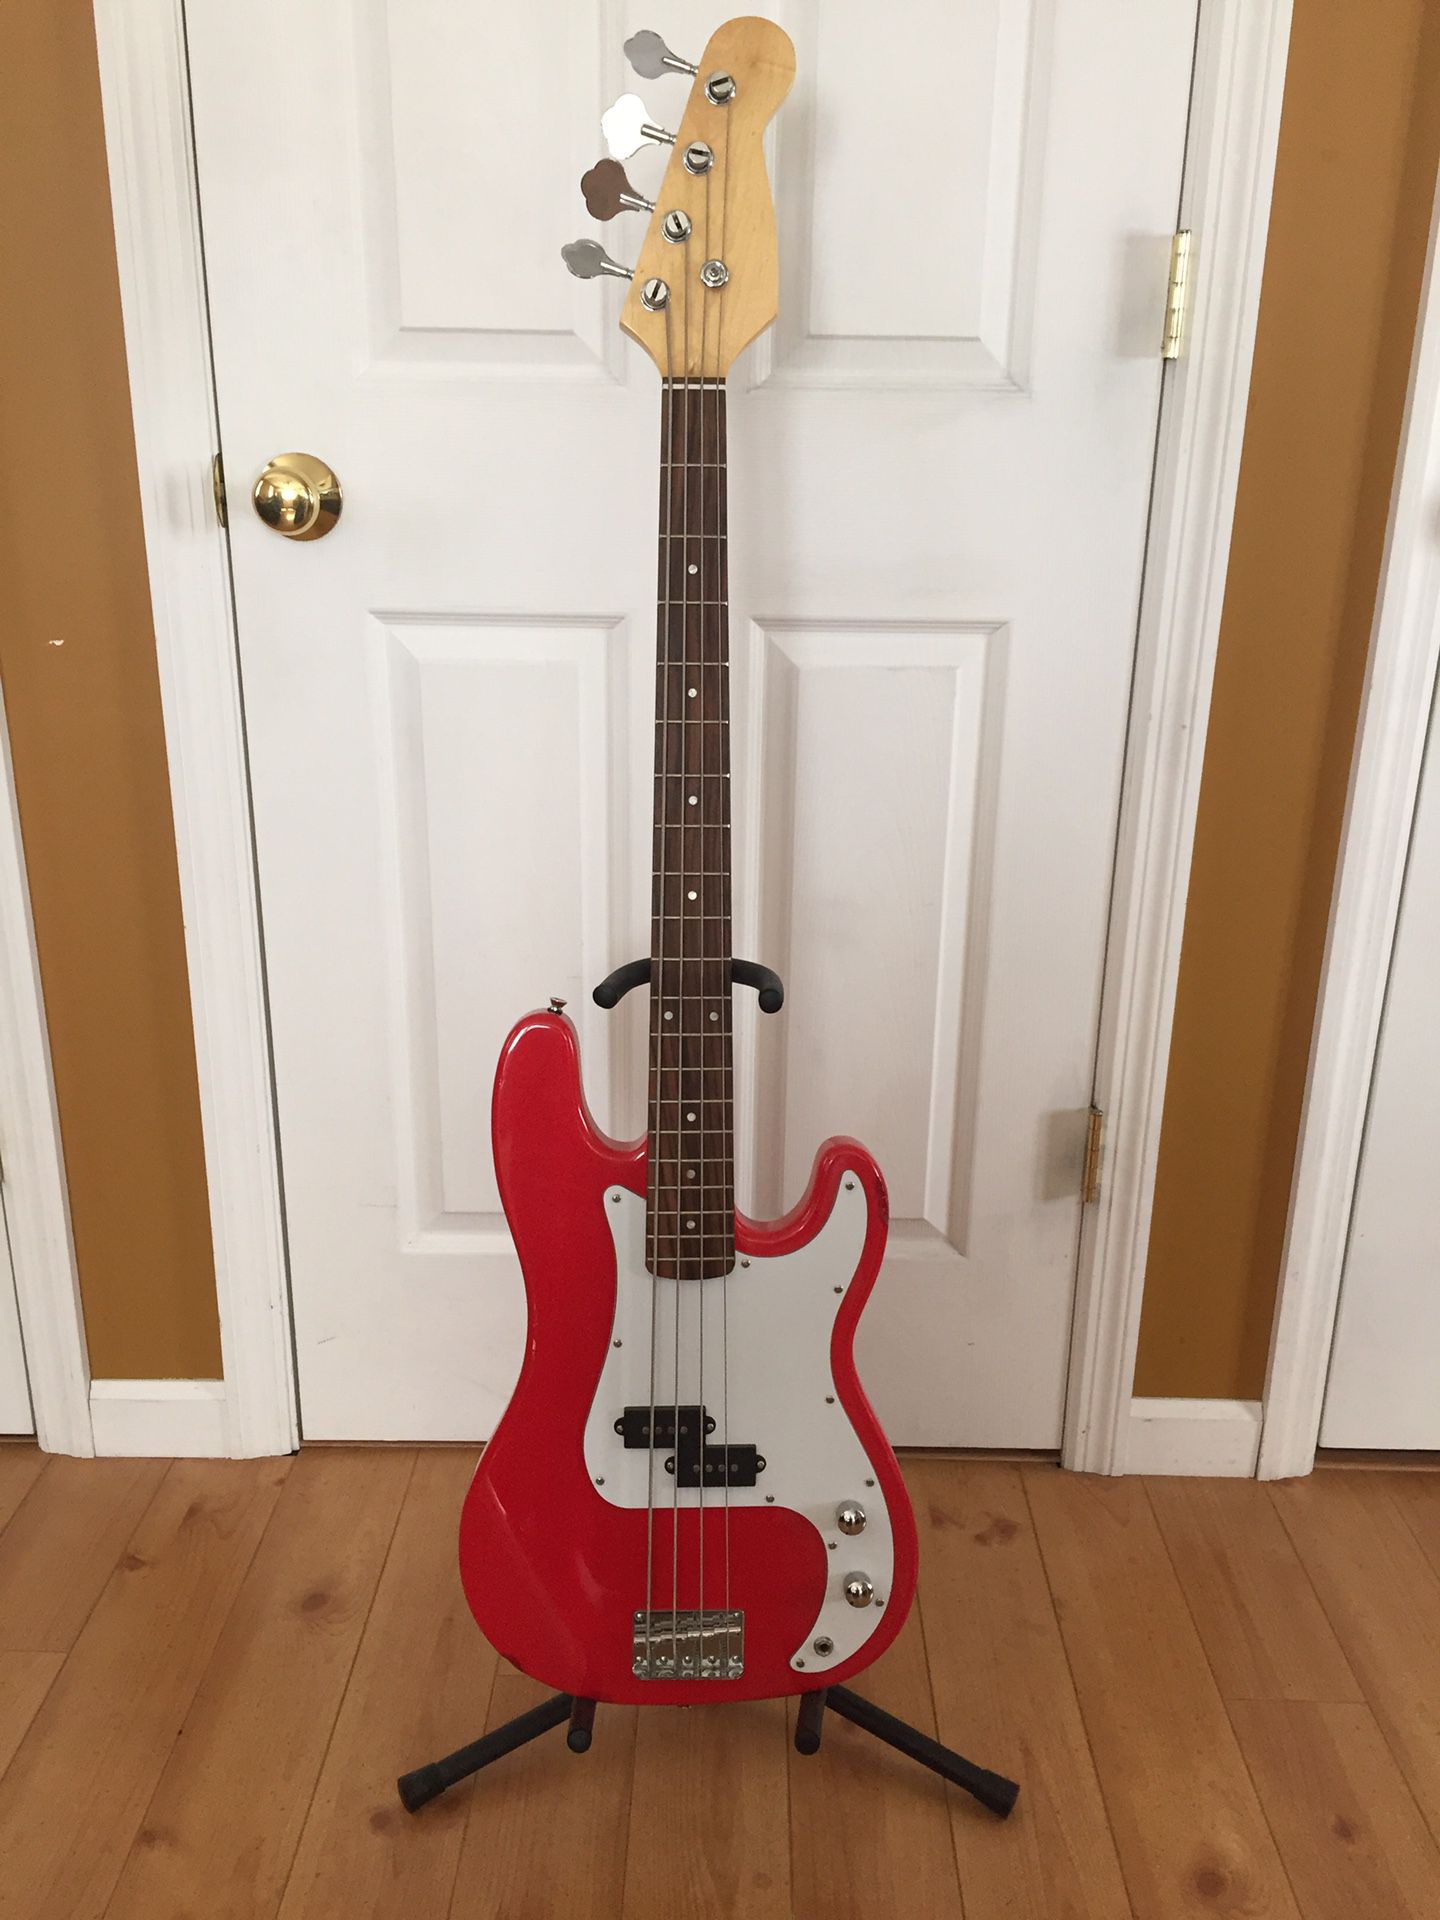 P-Bass electric bass guitar excellent condition like new! Fender precision bass red! FS/FT!